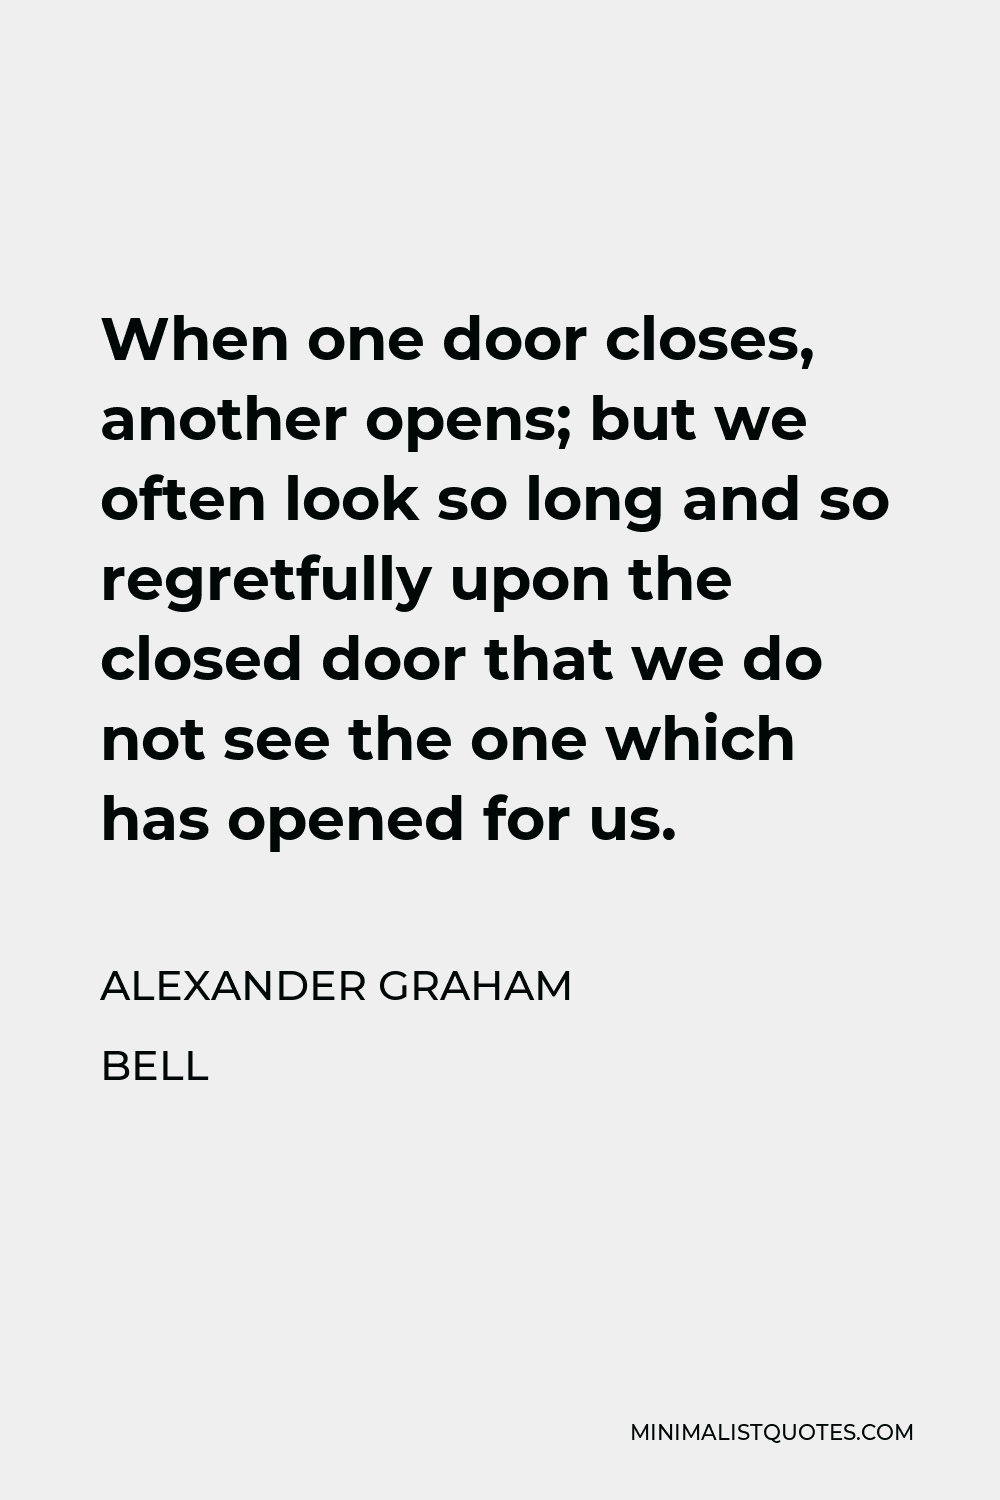 Alexander Graham Bell Quote - When one door closes, another opens; but we often look so long and so regretfully upon the closed door that we do not see the one which has opened for us.